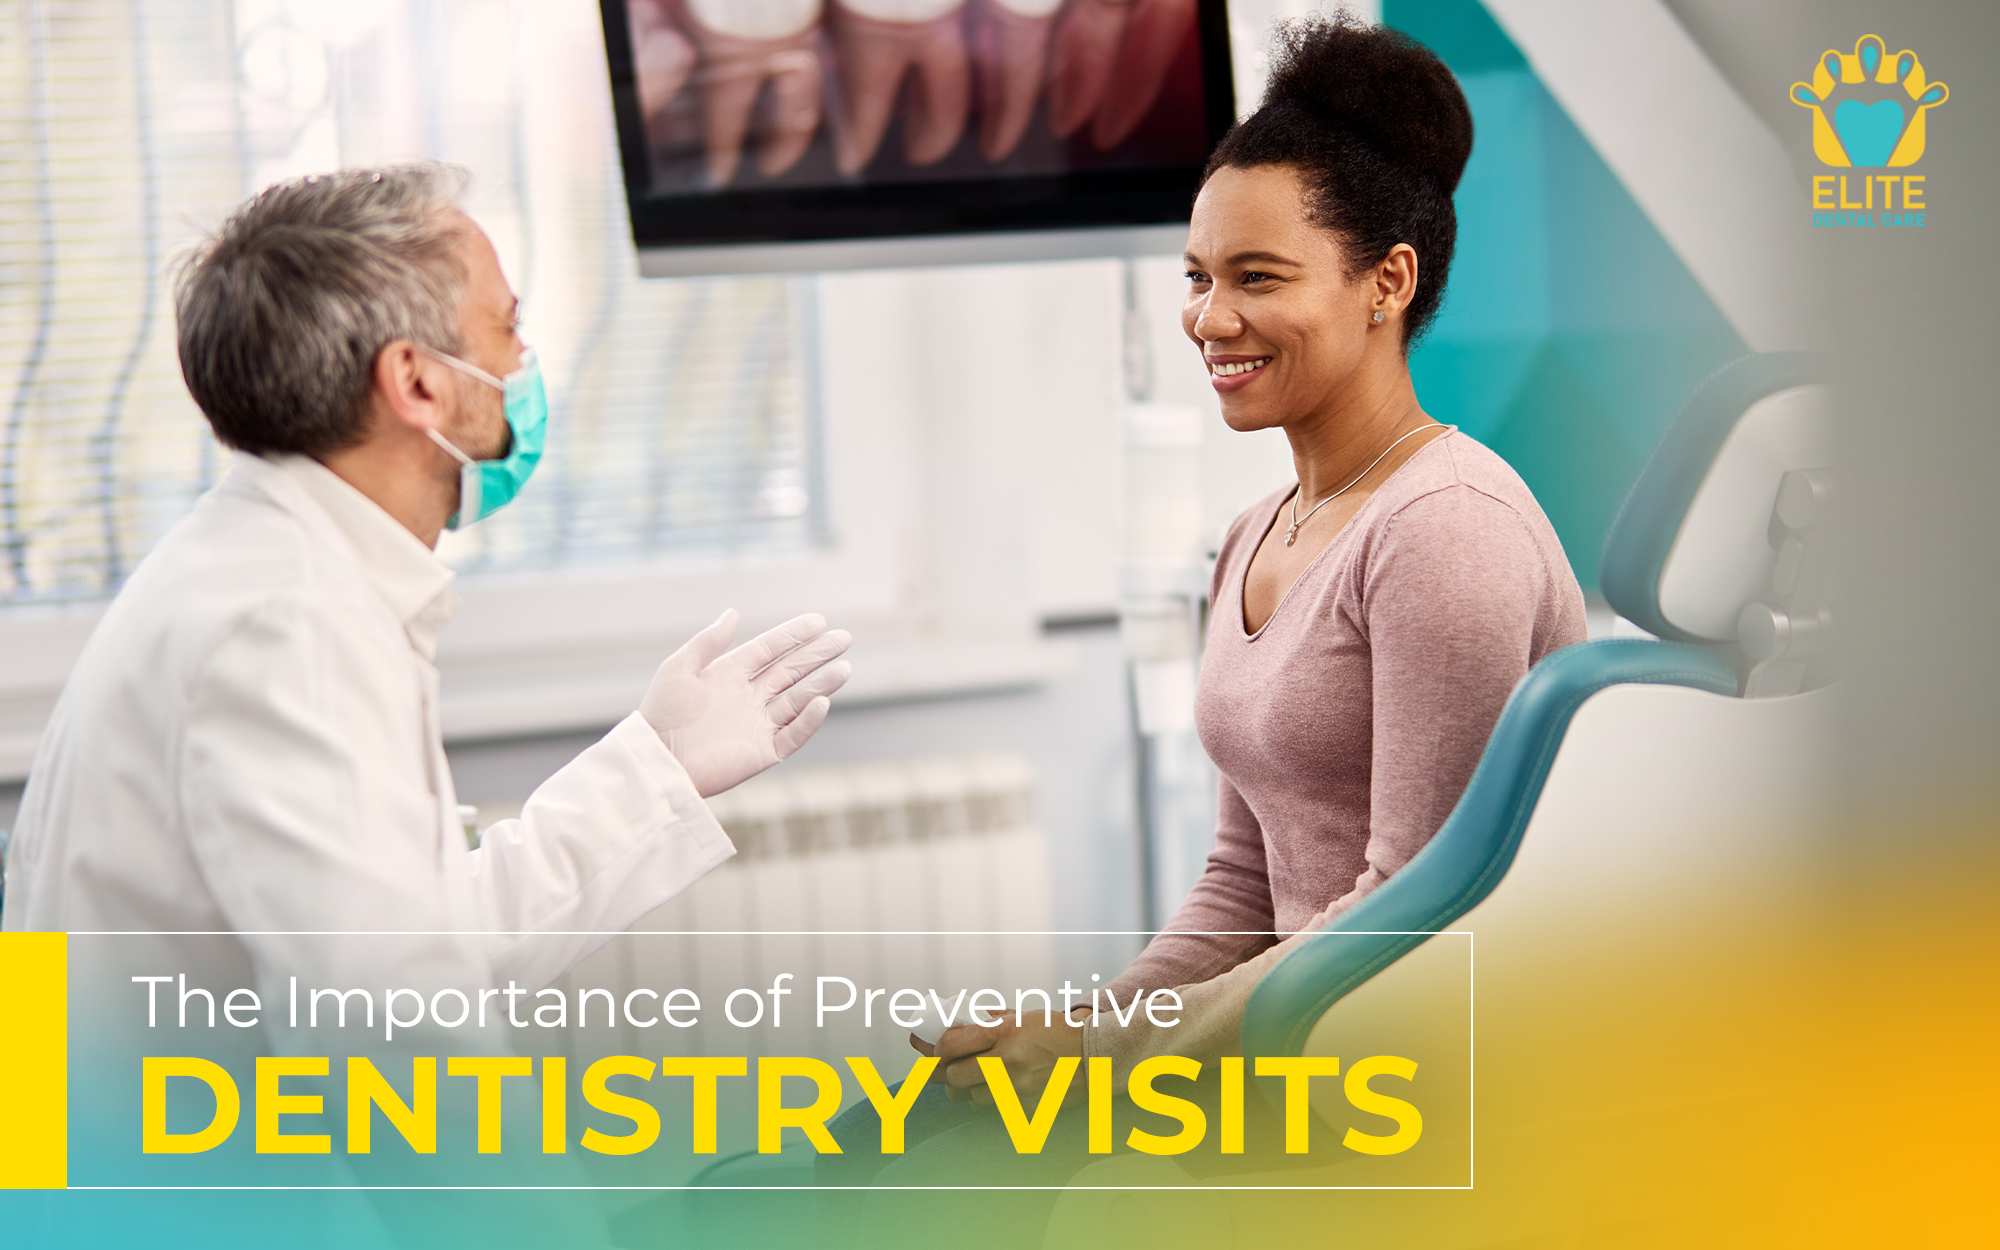 The Importance of Preventive Dentistry Visits